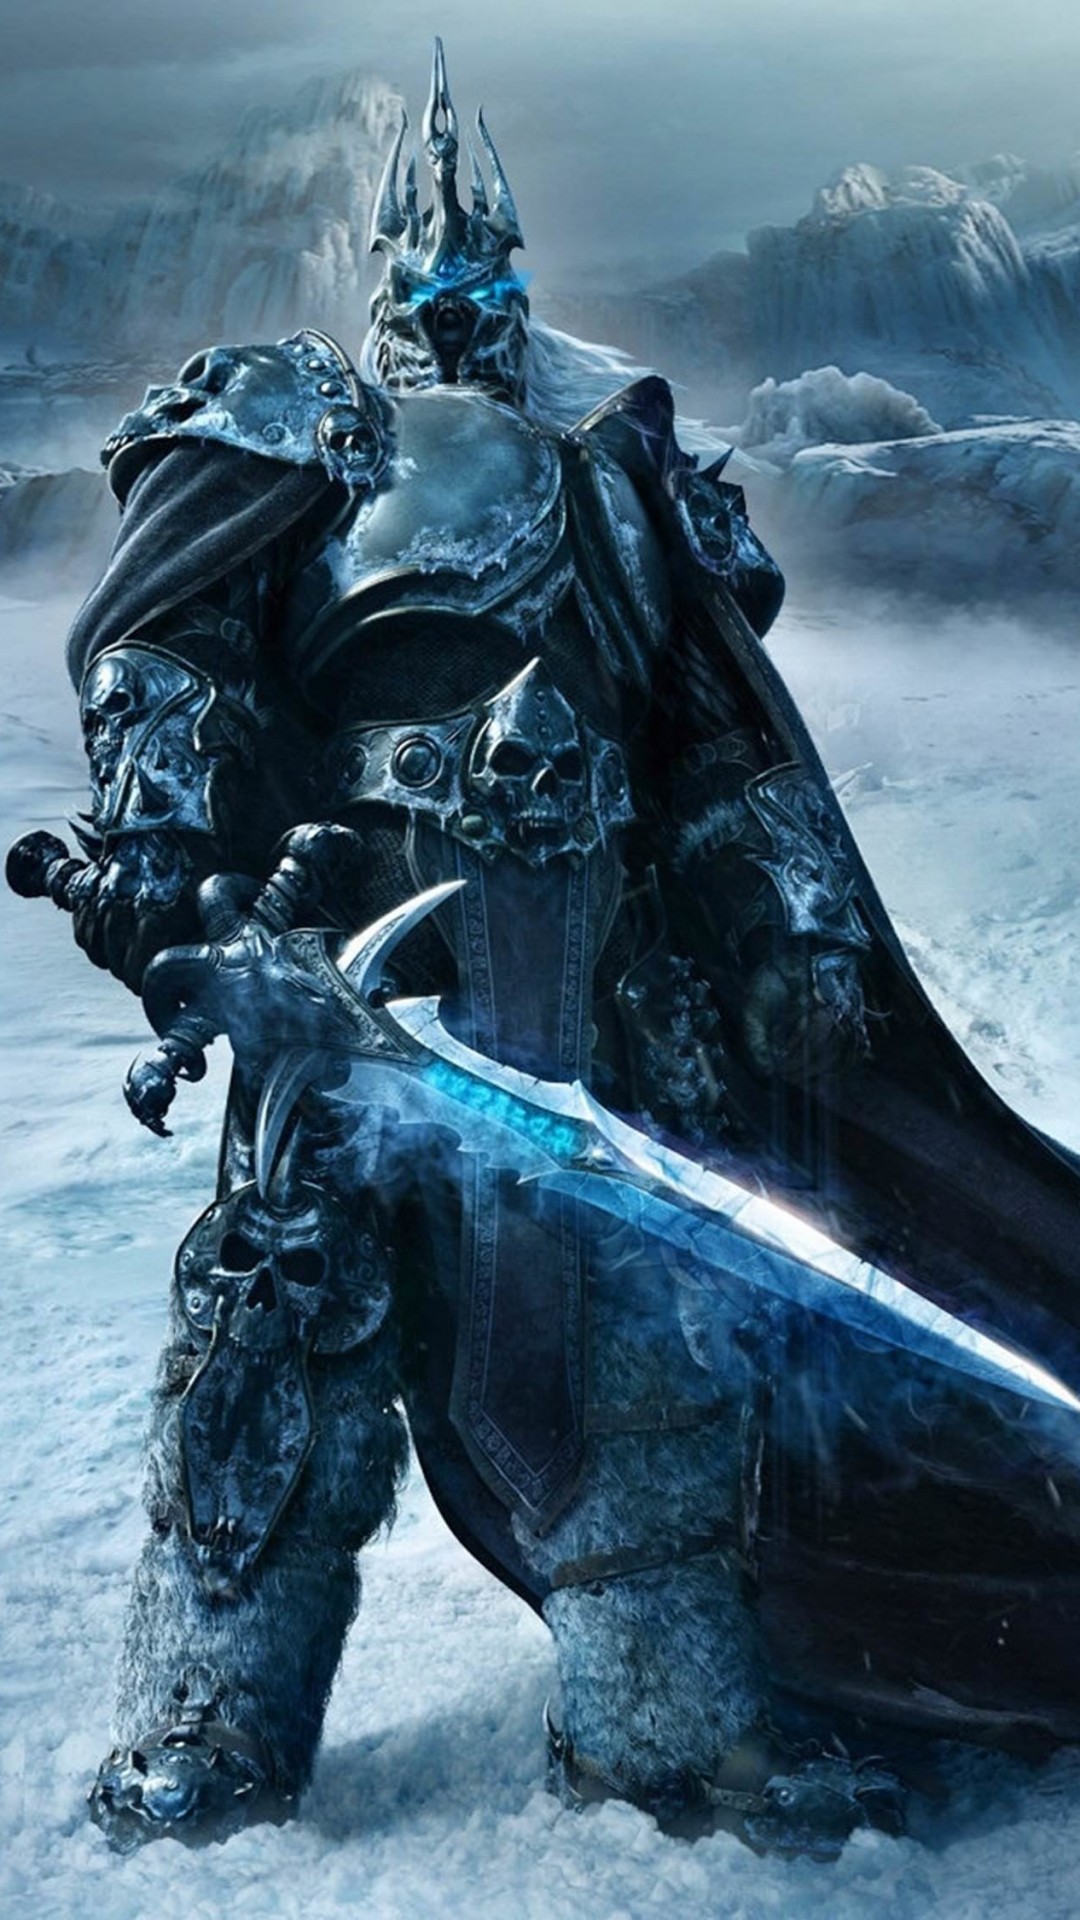 World of Warcraft: Wrath of the Lich King Wallpaper for SAMSUNG Galaxy Note 3